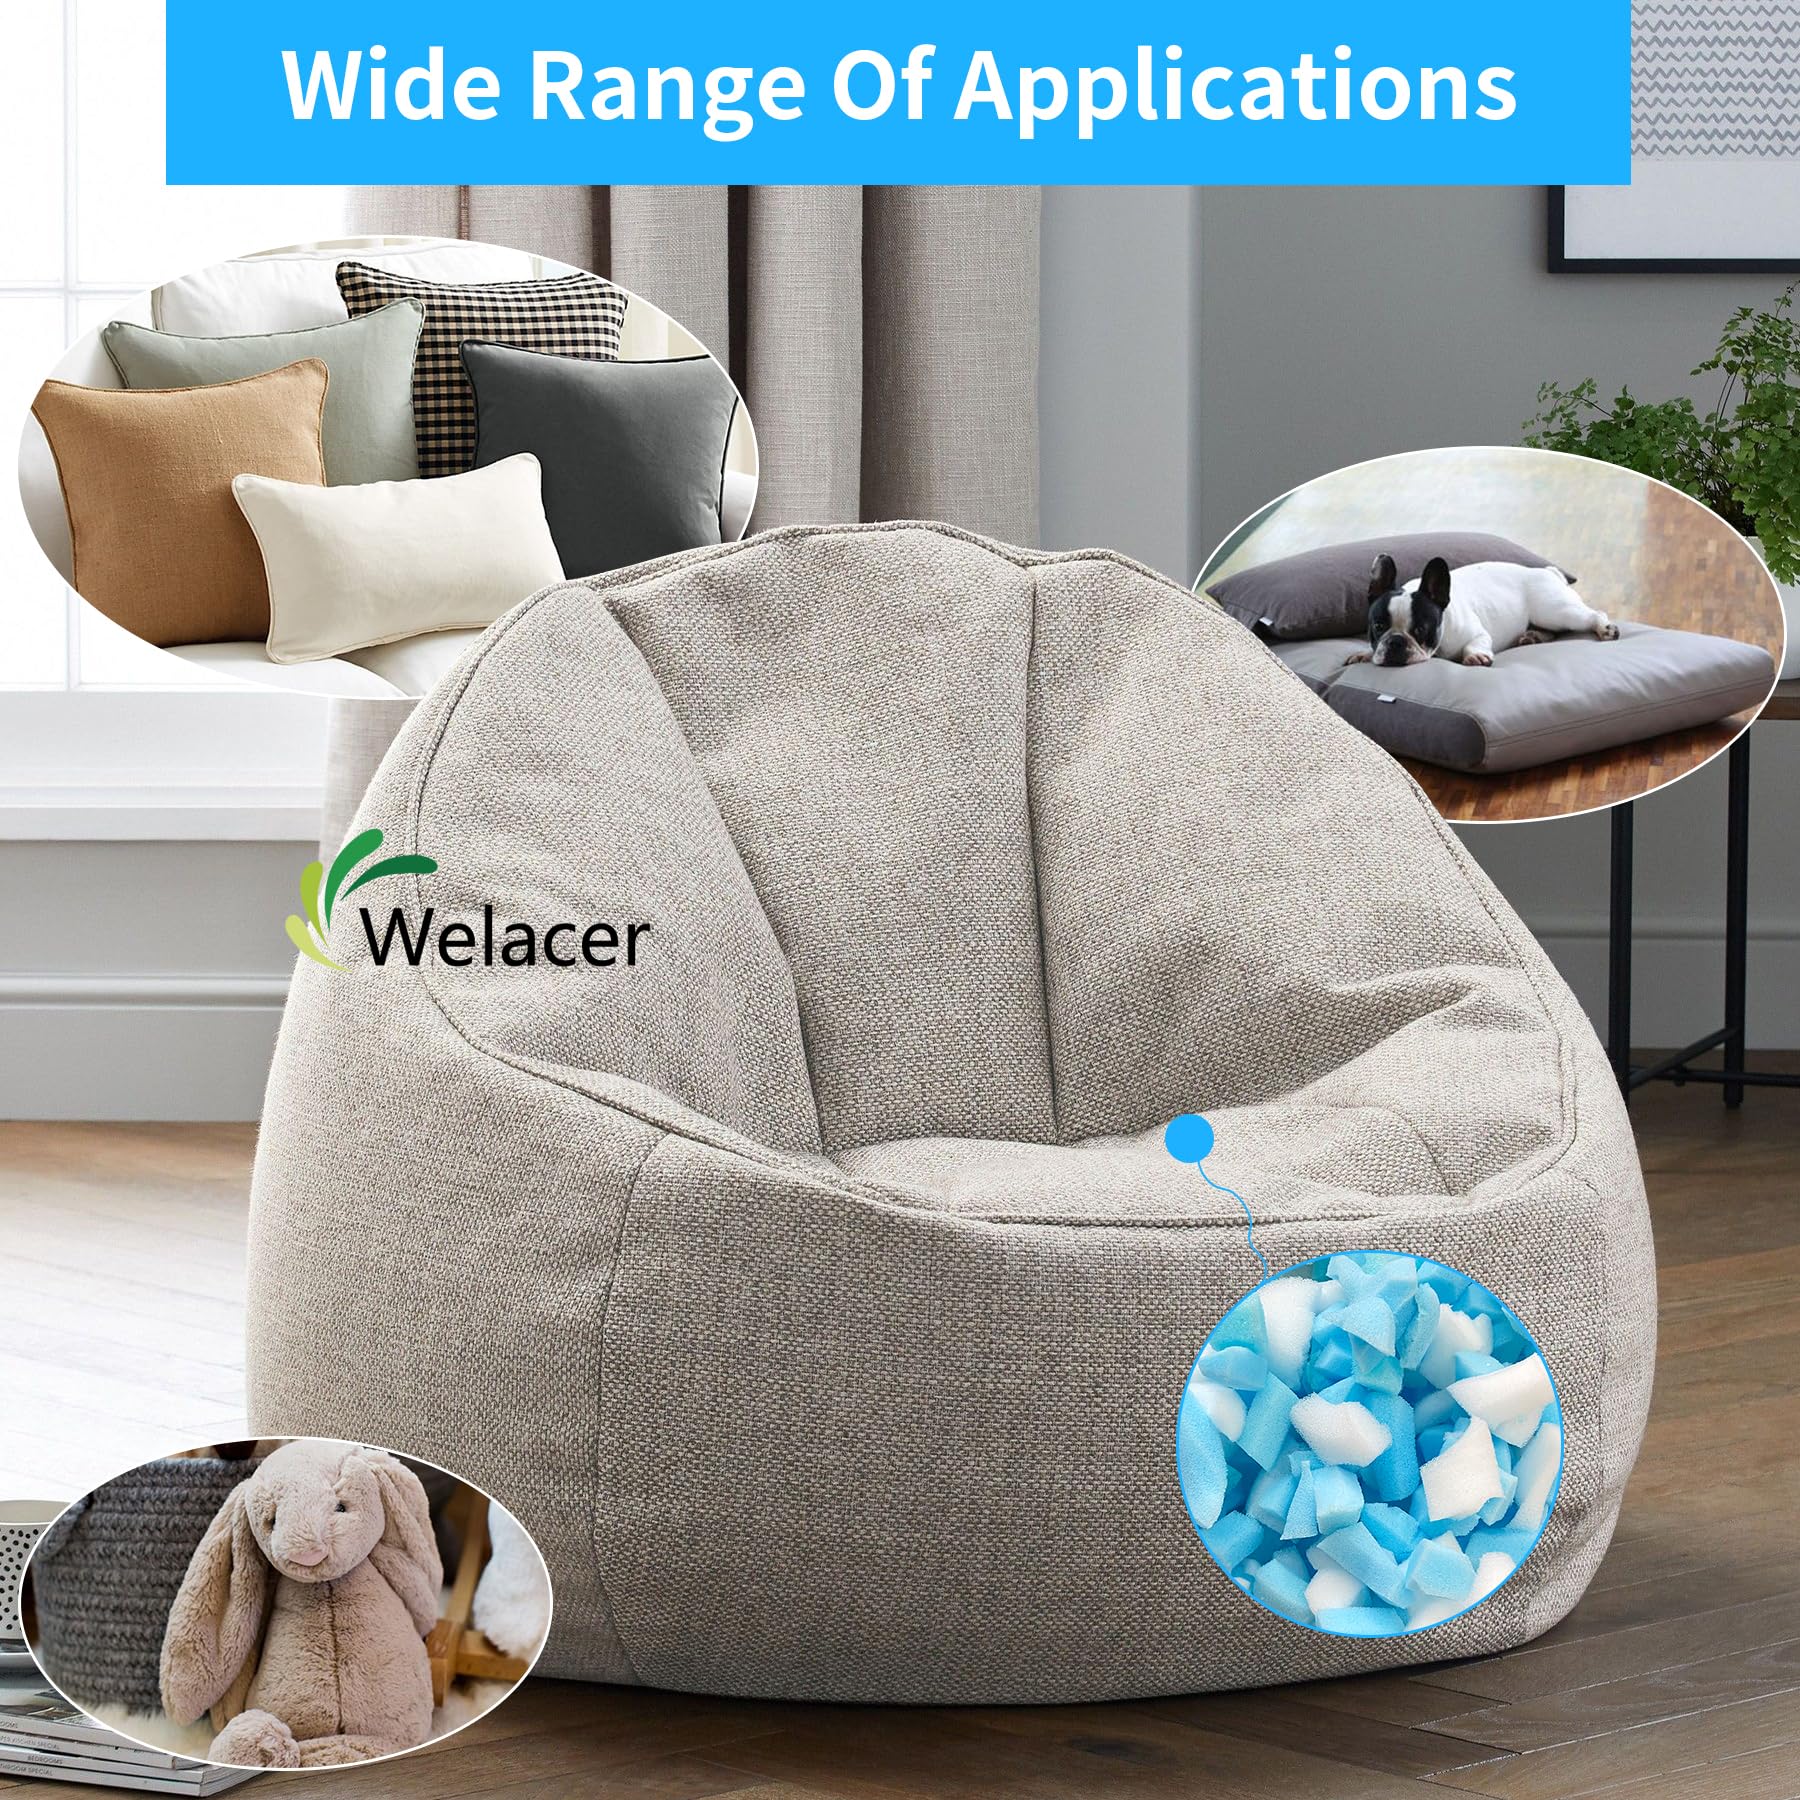 Welacer Shredded Memory Foam Filling 5lbs for Bean Bag Filler, Gel  Particles Refill, Premium Soft and Comfortable Stuffing (Mix Colours and  Irregular